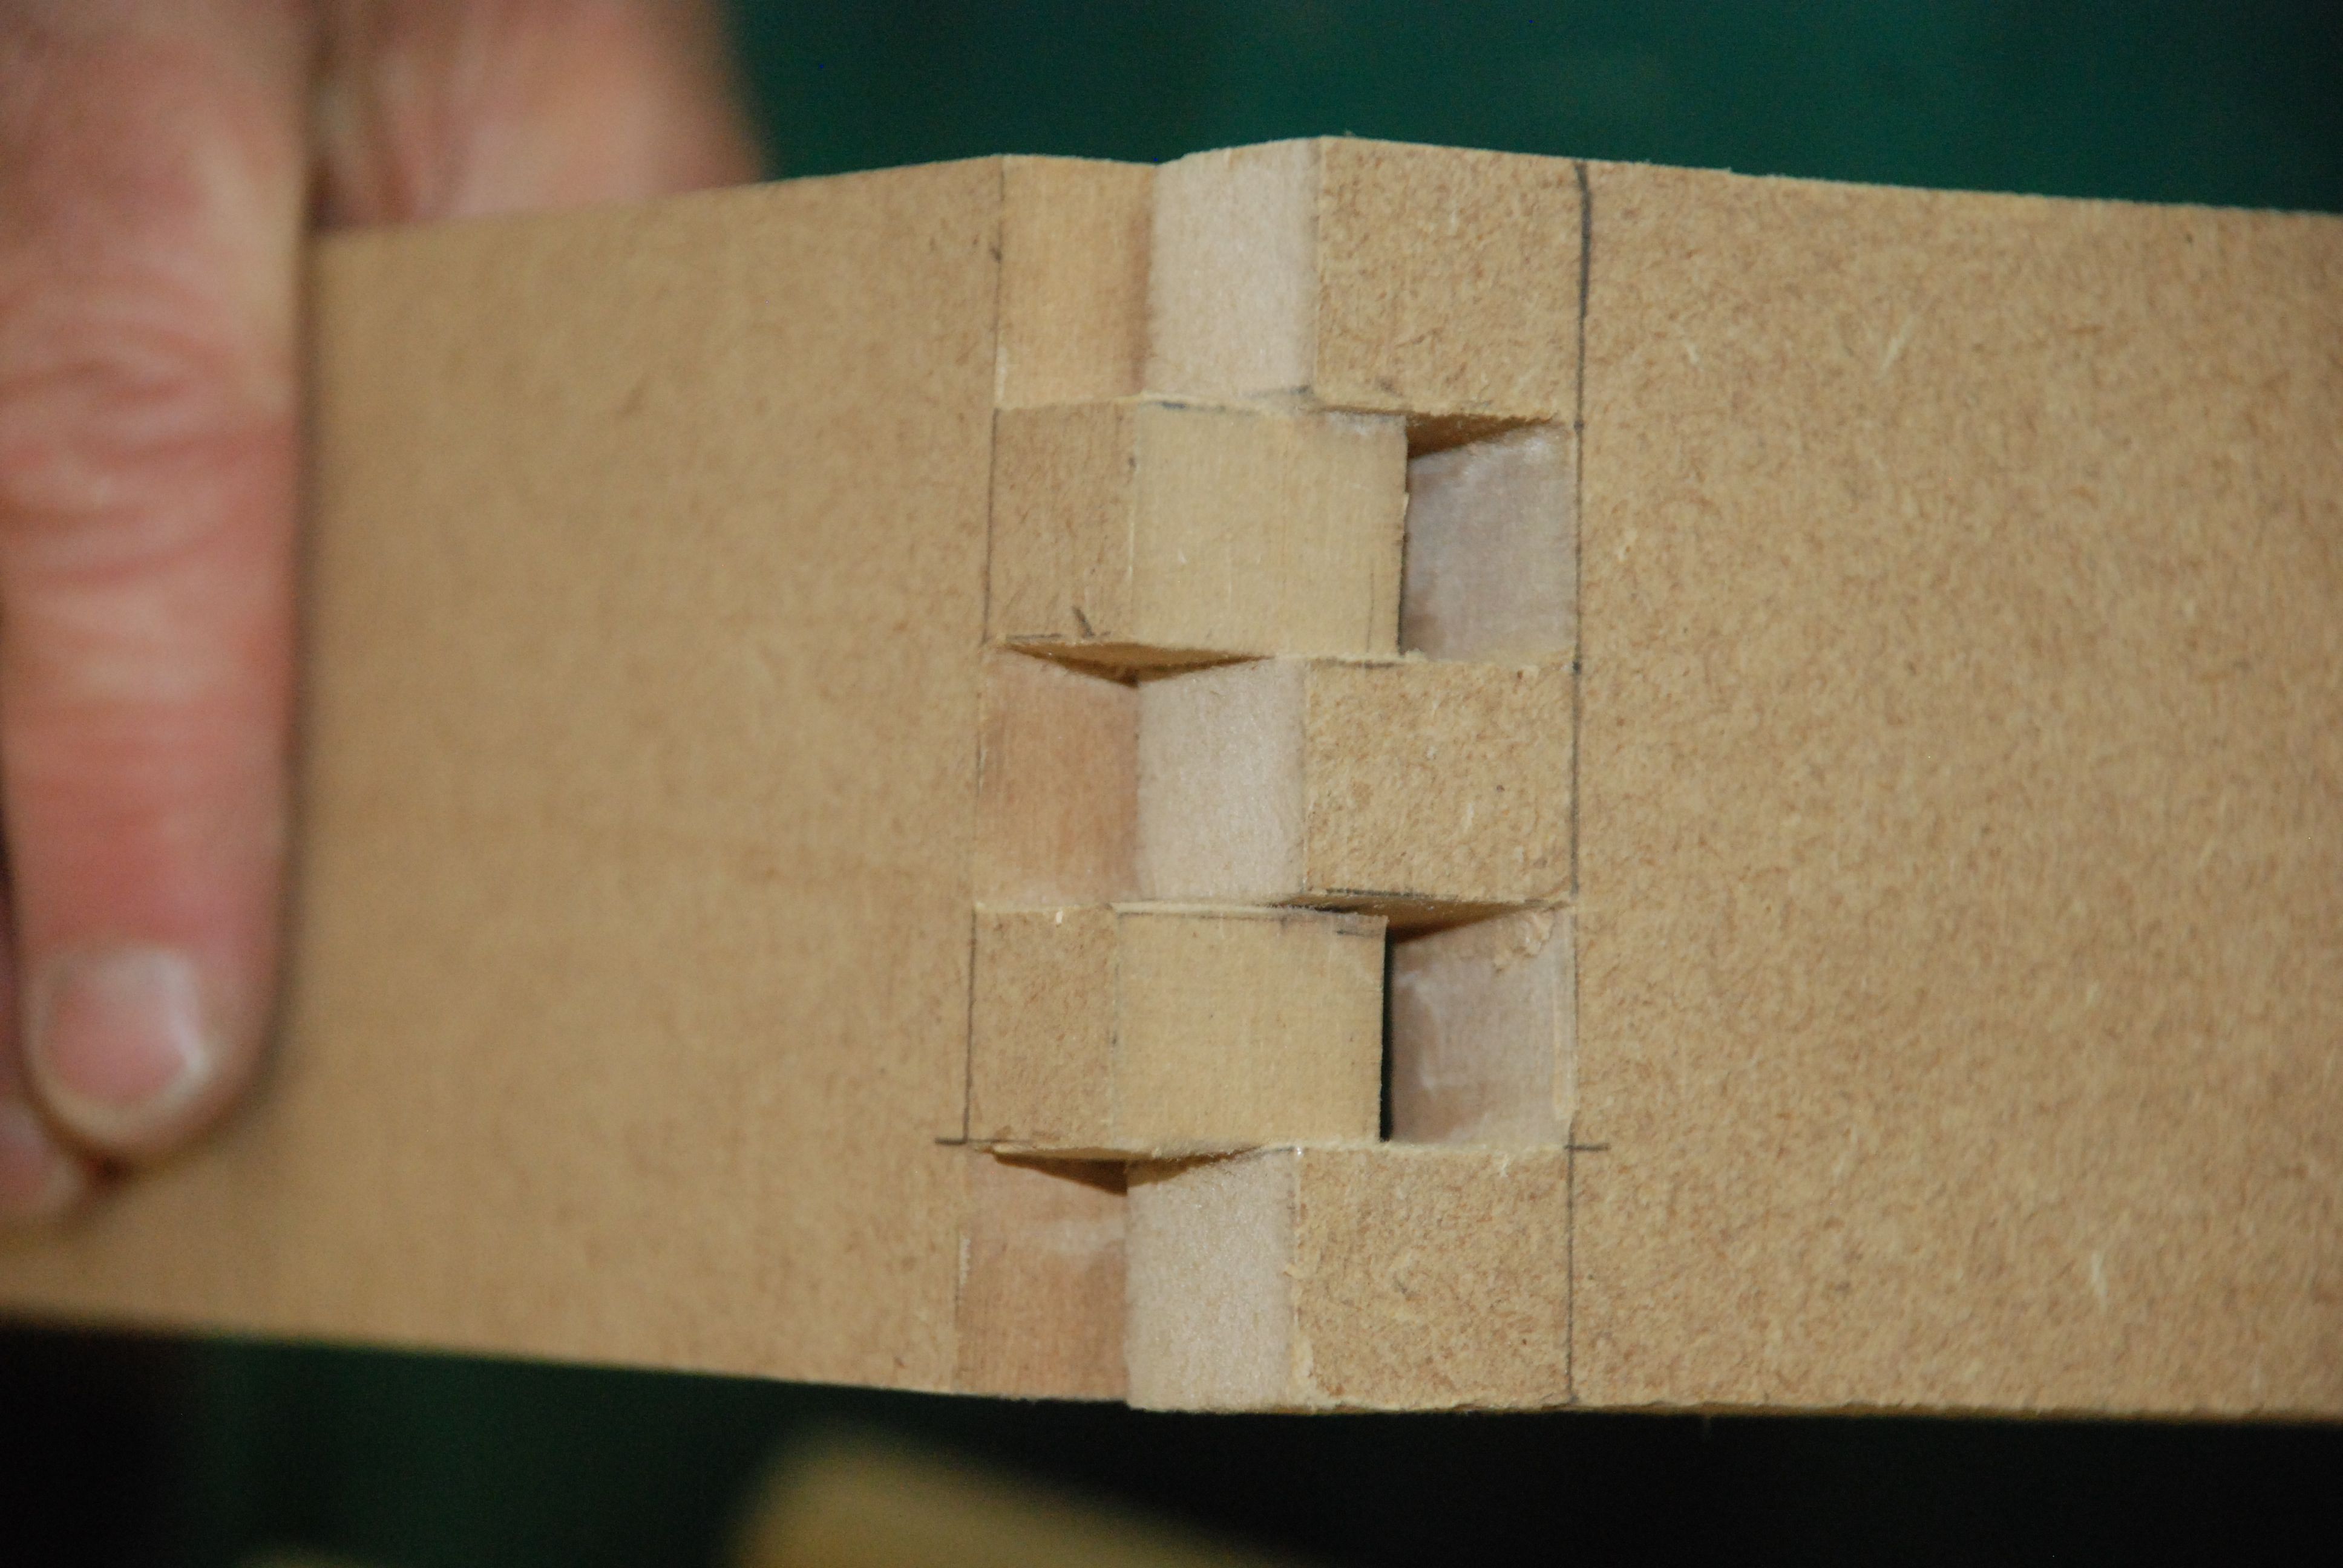 Box Joints - A Simple Alternative to Dovetails